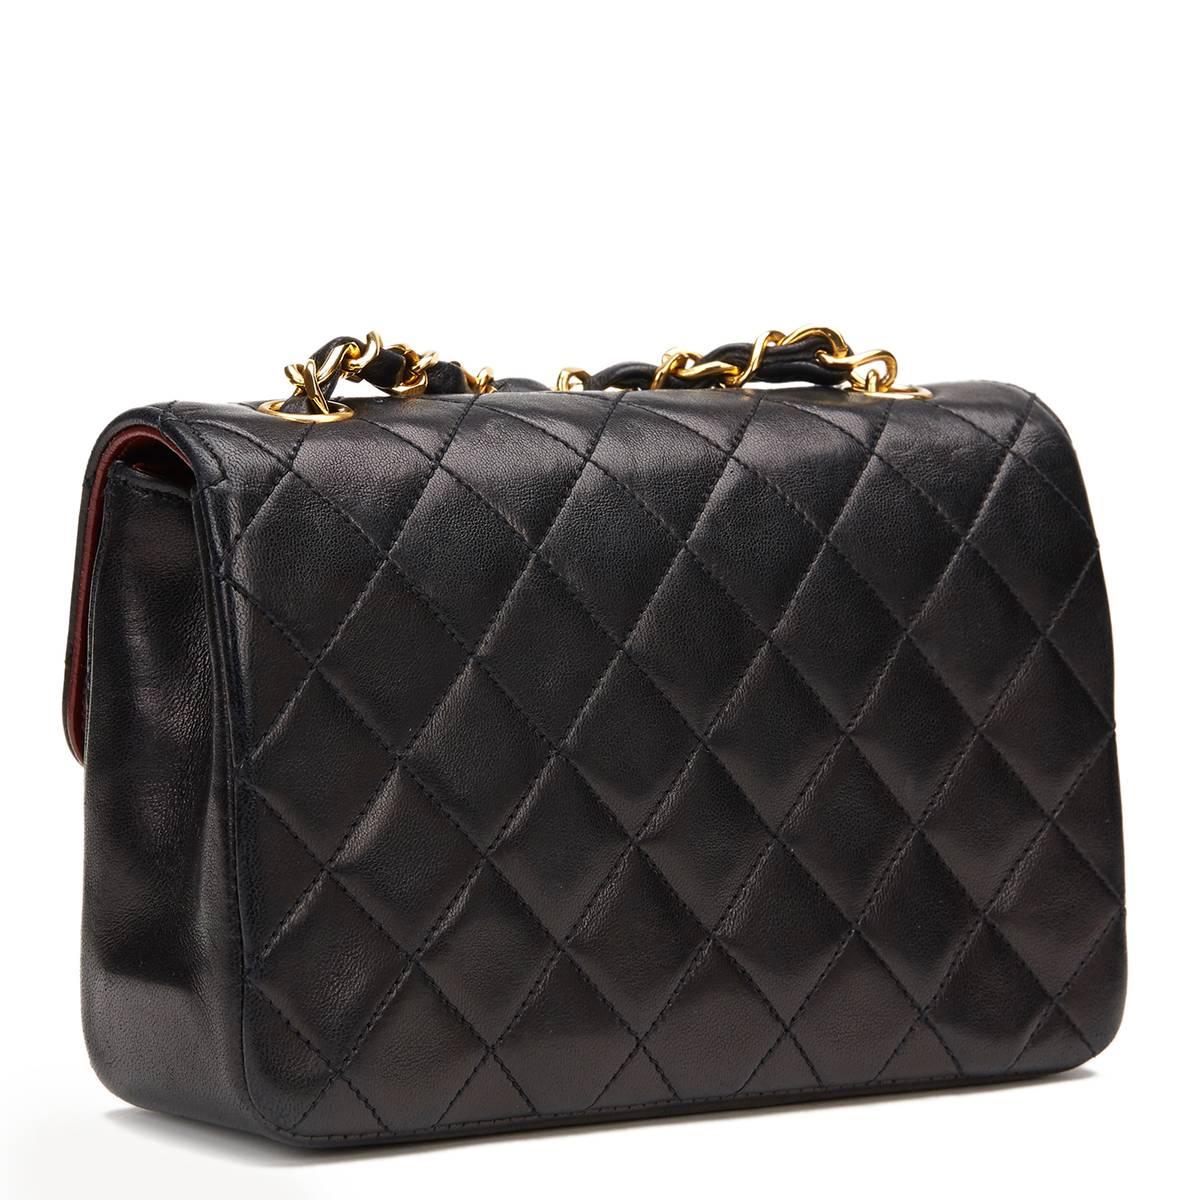 1980s Chanel Black Quilted Lambskin Vintage Mini Flap Bag 1